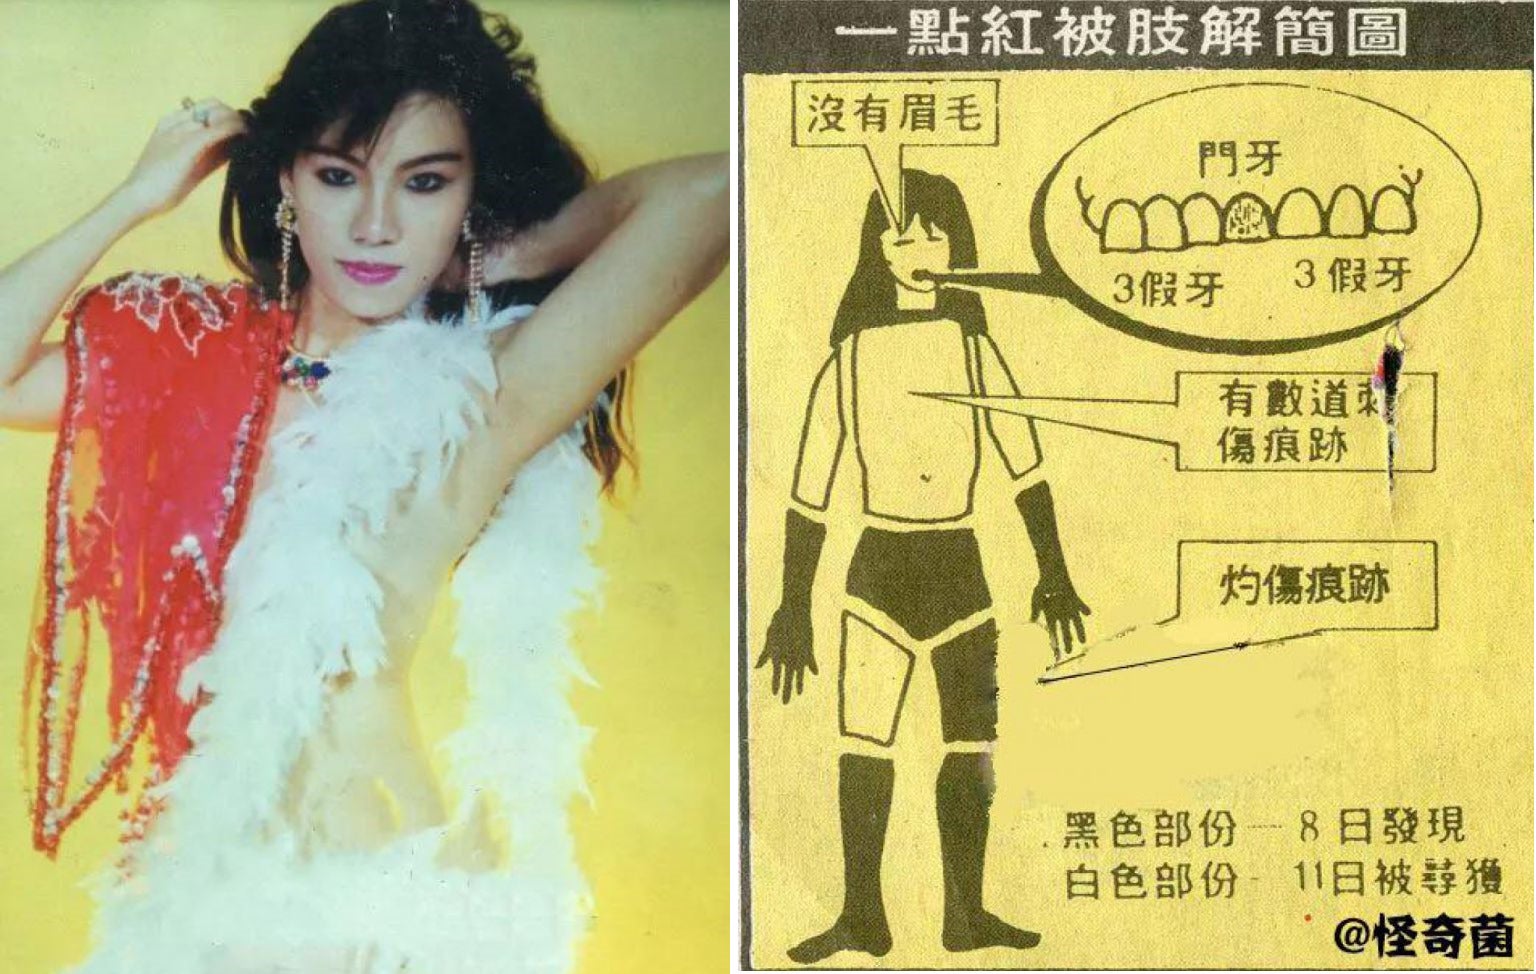 Photos Of Lily Chua, One When She Was A Dancer, And One From A Newspaper Covering Her Murder Case, Showing How Her Body Had Been Cut Into 11 Parts